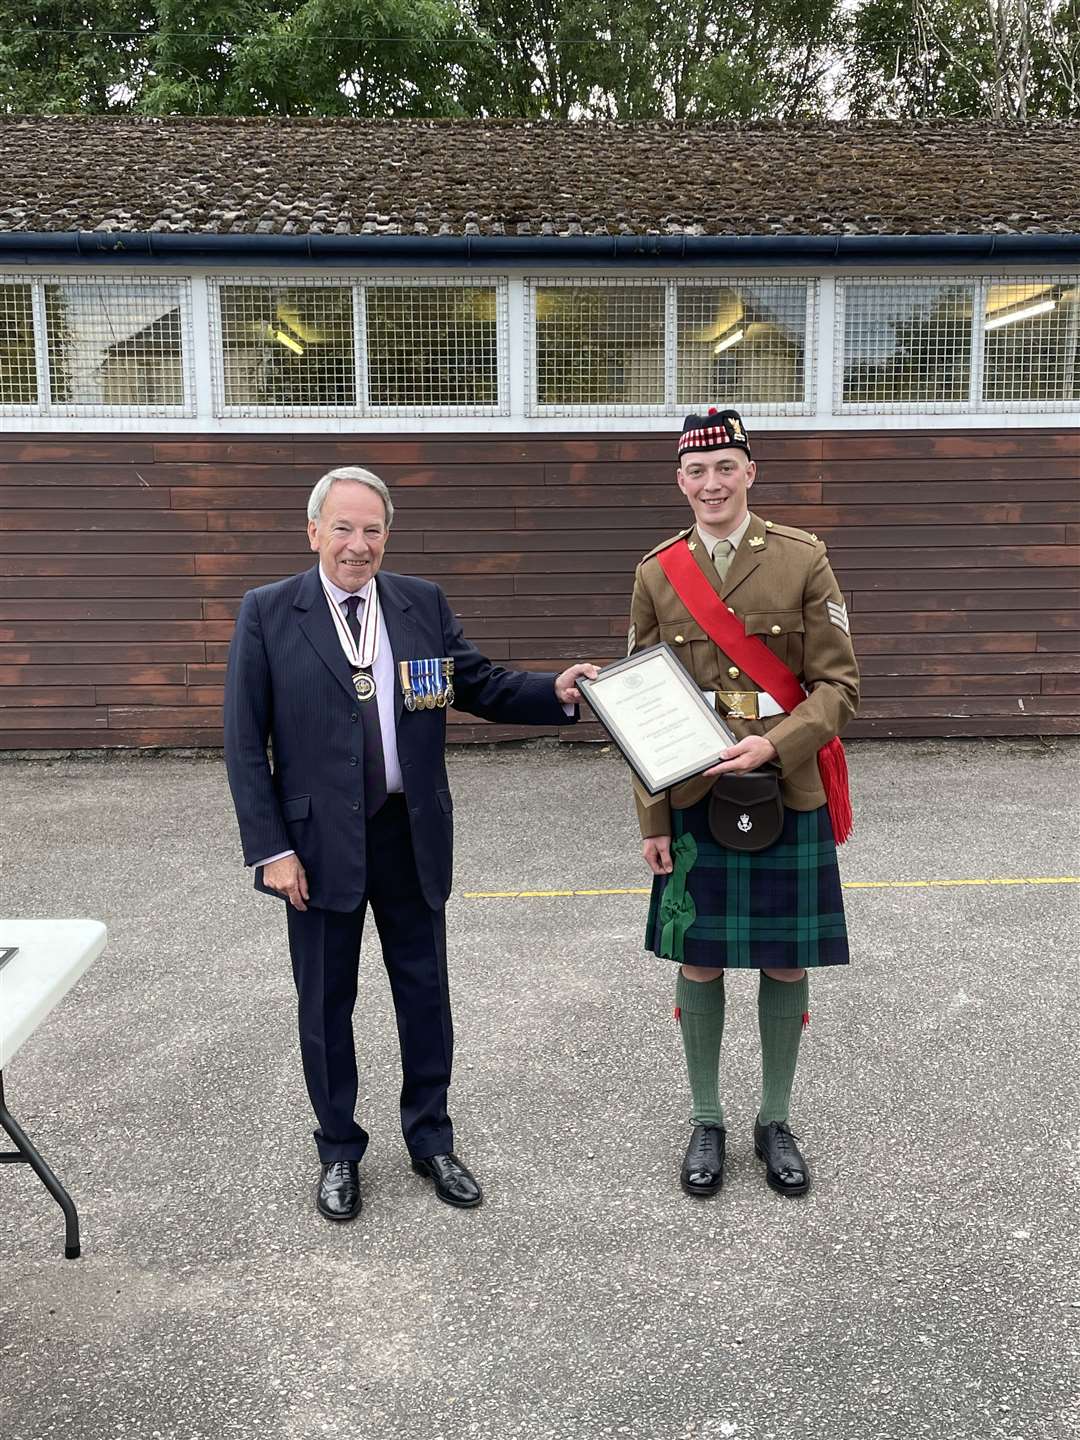 Sgt Samuel Stubbs receiving his certificate of appointment from Vice-Lord Lieutenant Douglas Young.